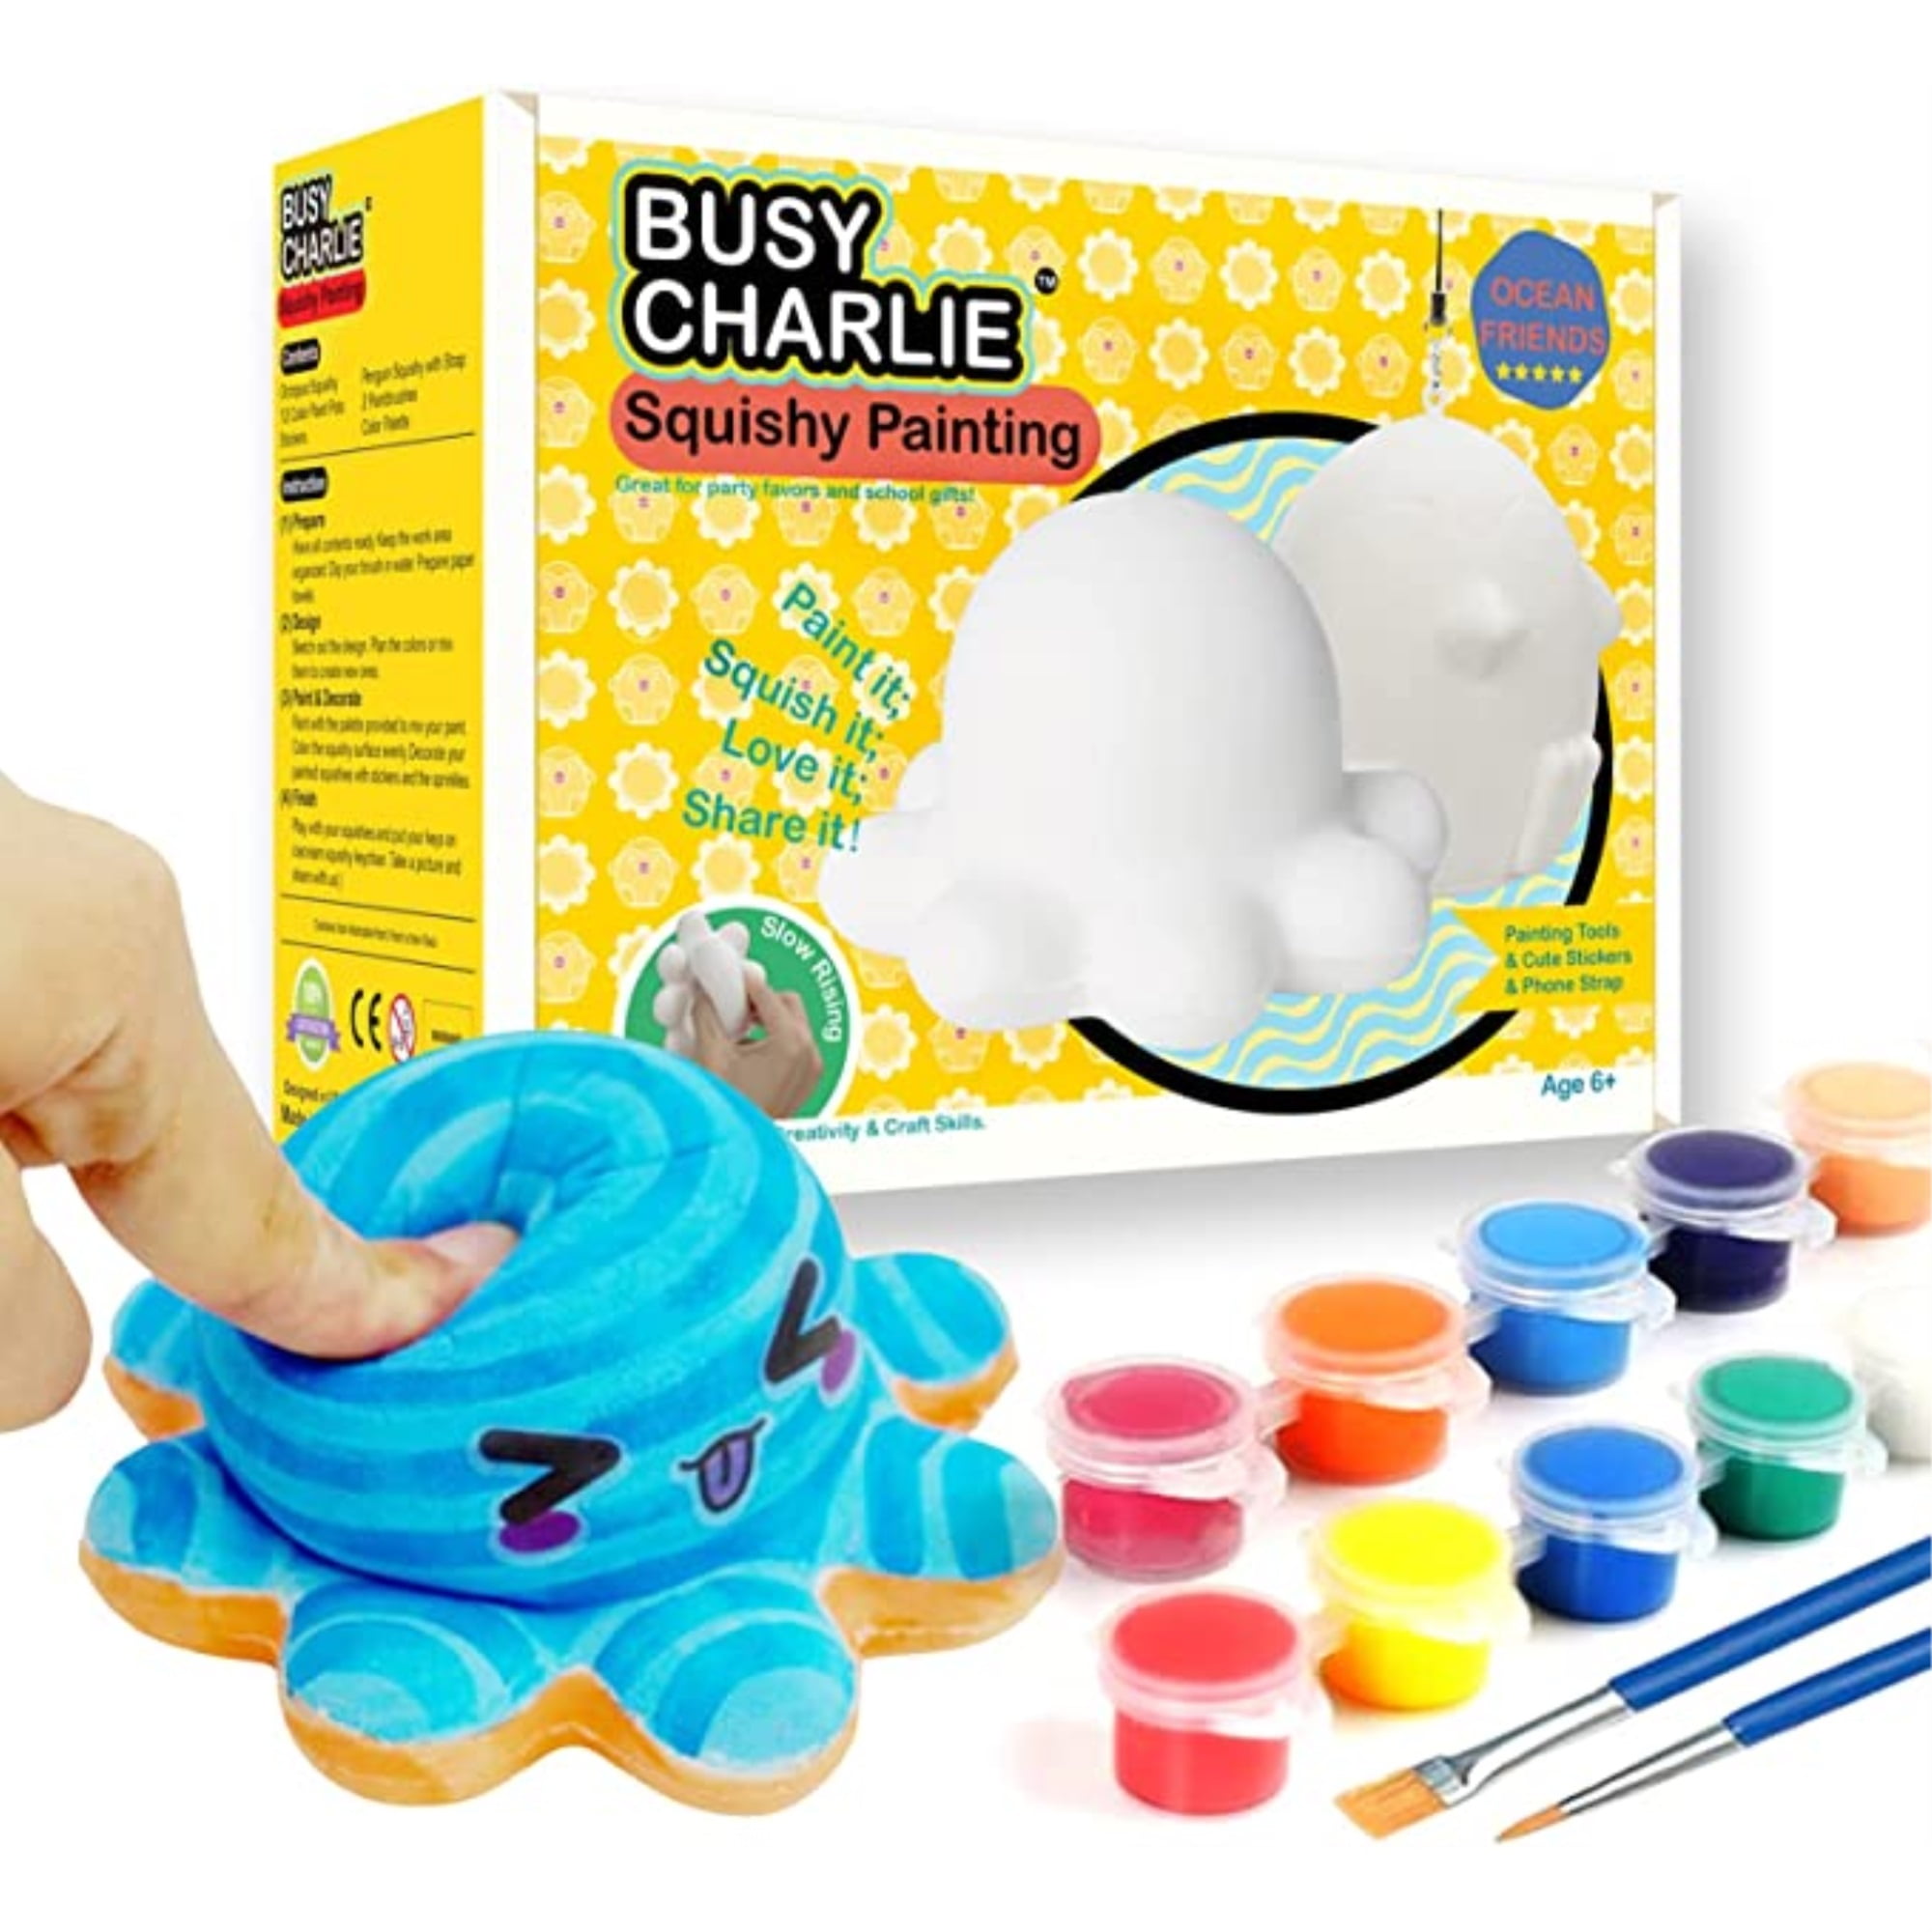 Busy Charlie Squishy Painting Kit - 11 Year Old Girl Gift Ideas, Art Kits  for Kids 6-9, Art Sets for Girls Ages 7-12, Art Supplies for Kids 6-8,  Craft